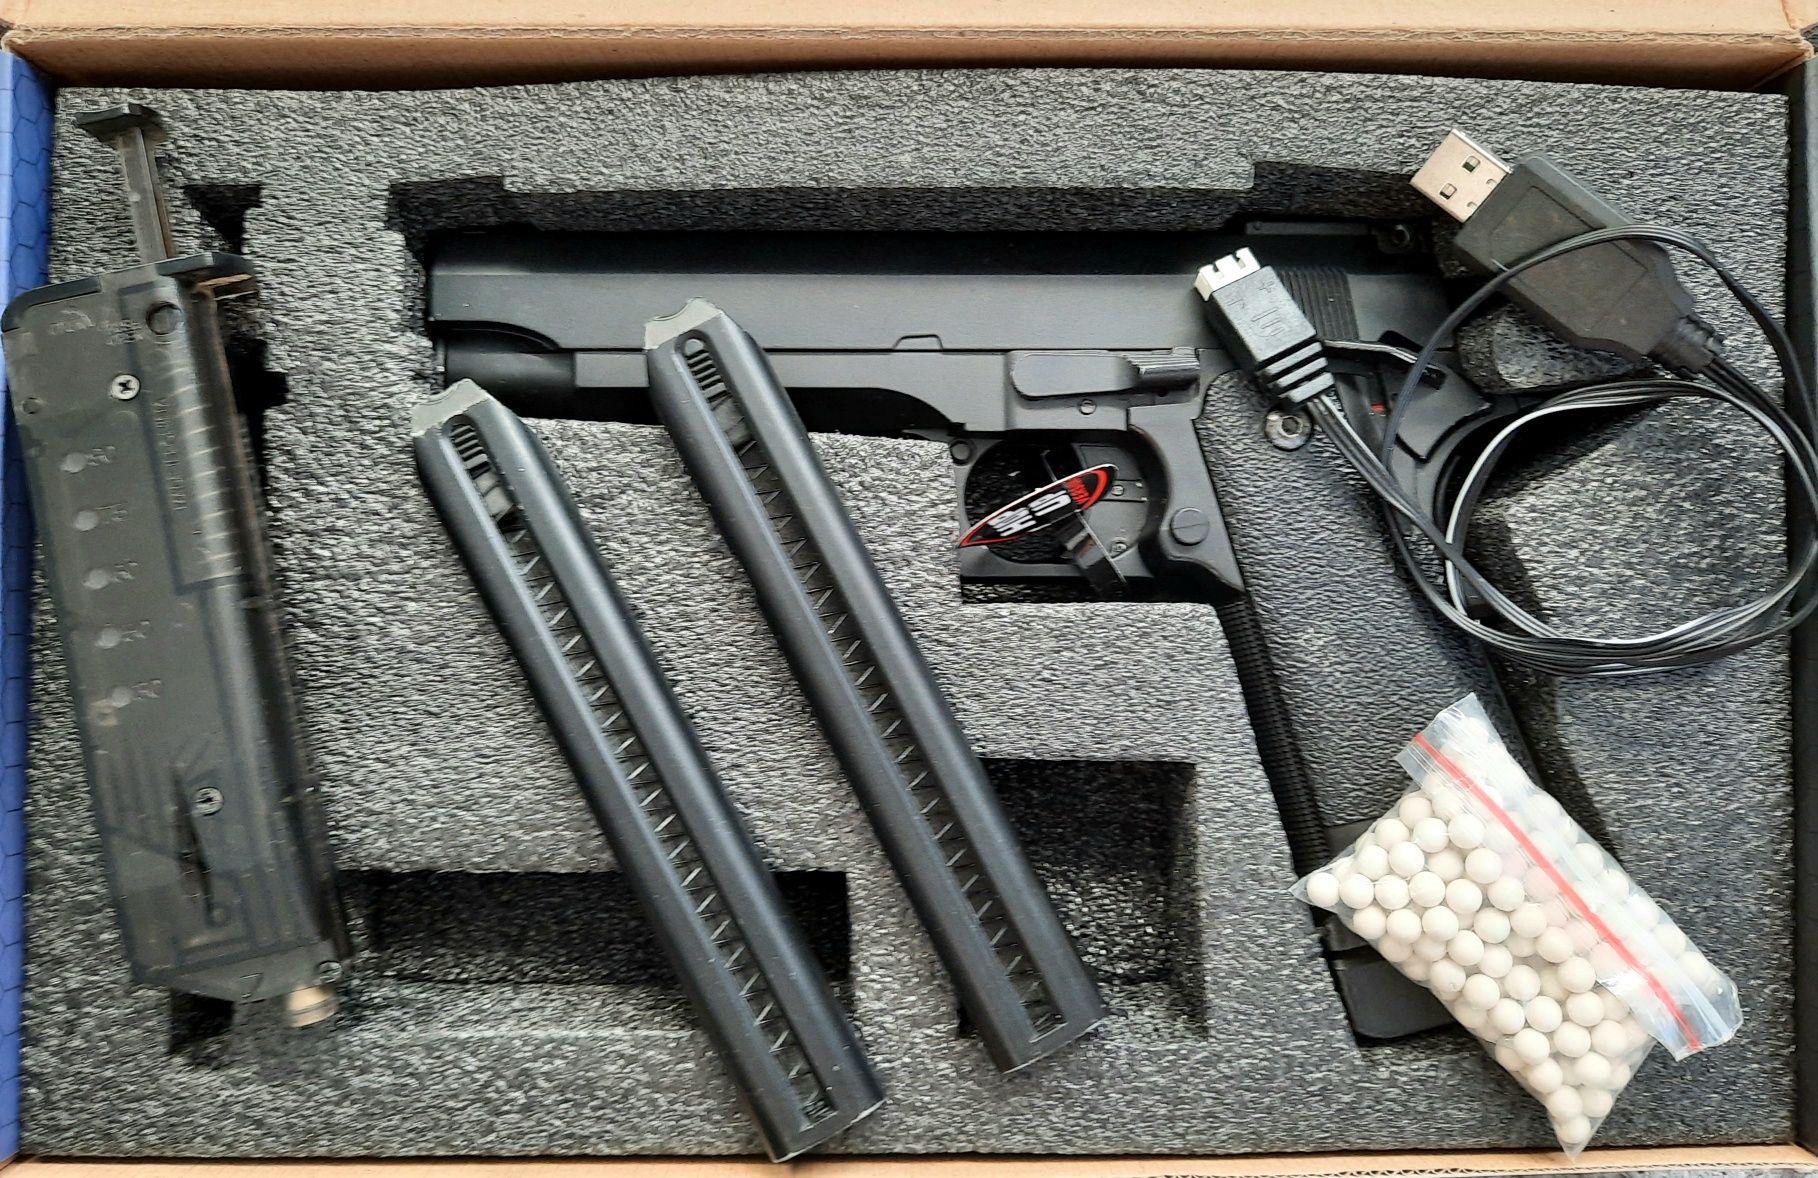 Replica Pistol Airsoft Electric CM.128S Mosfet Edition Cyma